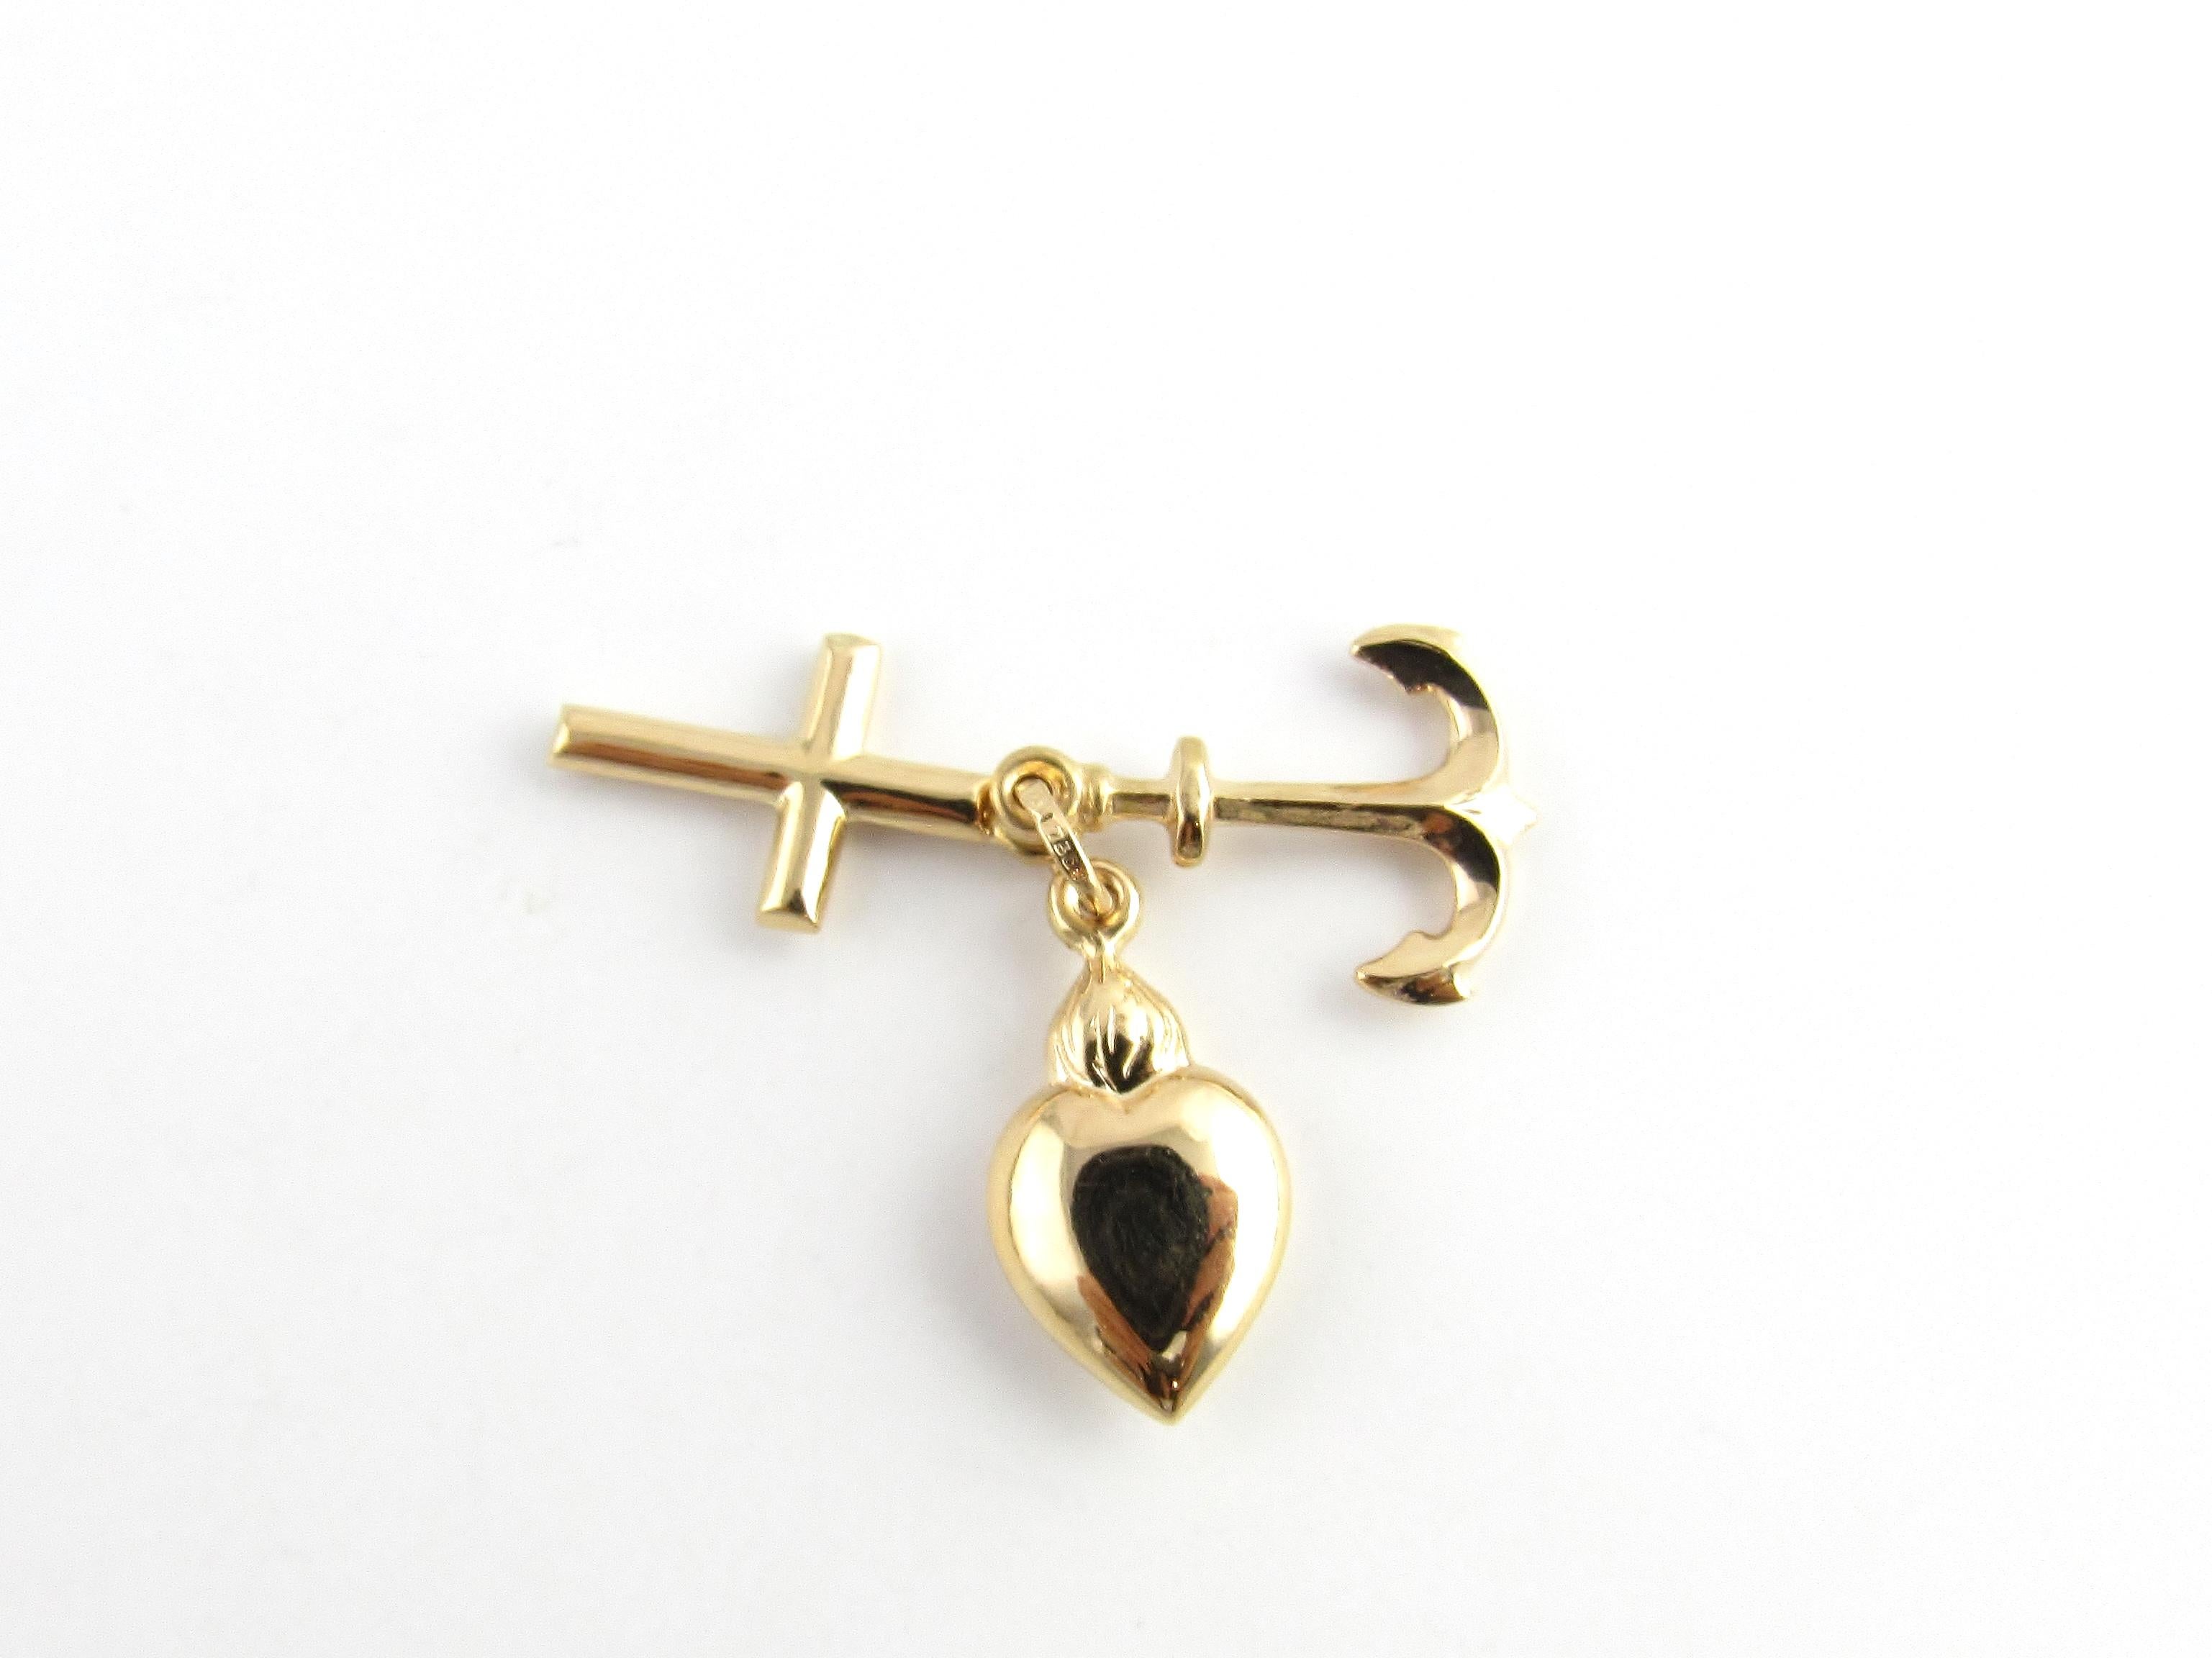 Vintage 14 Karat Yellow Gold Faith, Hope and Charity Charm

This lovely charm features a cross, an anchor and a heart; the worldwide symbols for faith, hope and charity. Beautifully detailed in 14K yellow gold.

Size: Cross: 18 mm x 10 mm 
Anchor: